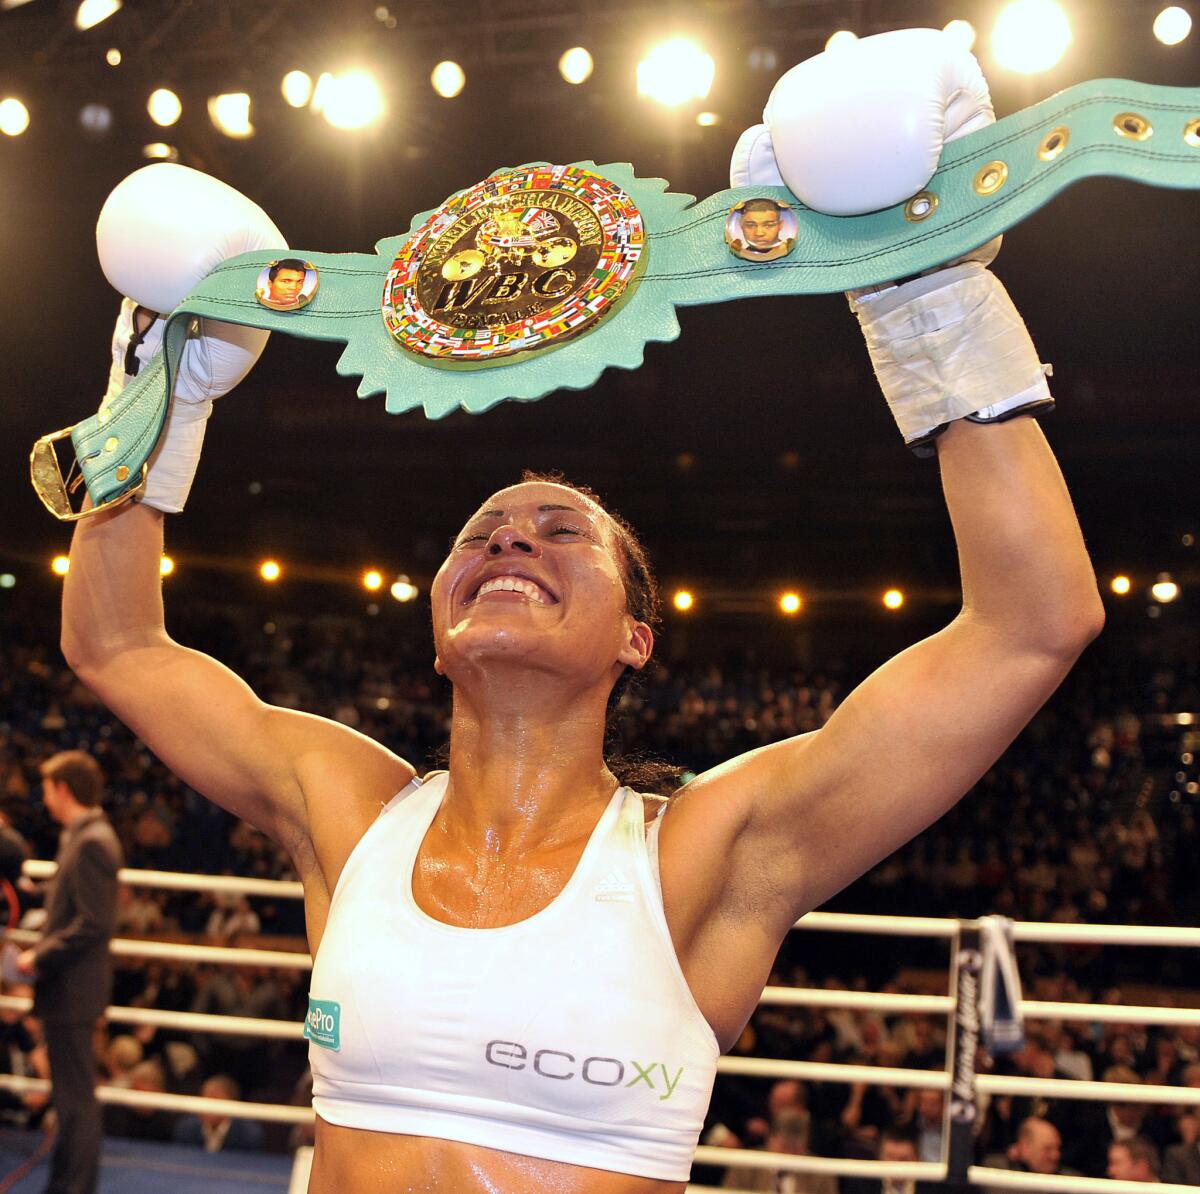 Norwegian boxer Cecilia Braekhus reacts after winning the WBA/WBC female welterweight title fight in Kiel, northern Germany, Saturday, March 14, 2009. Braekhus won the fight after ten rounds.